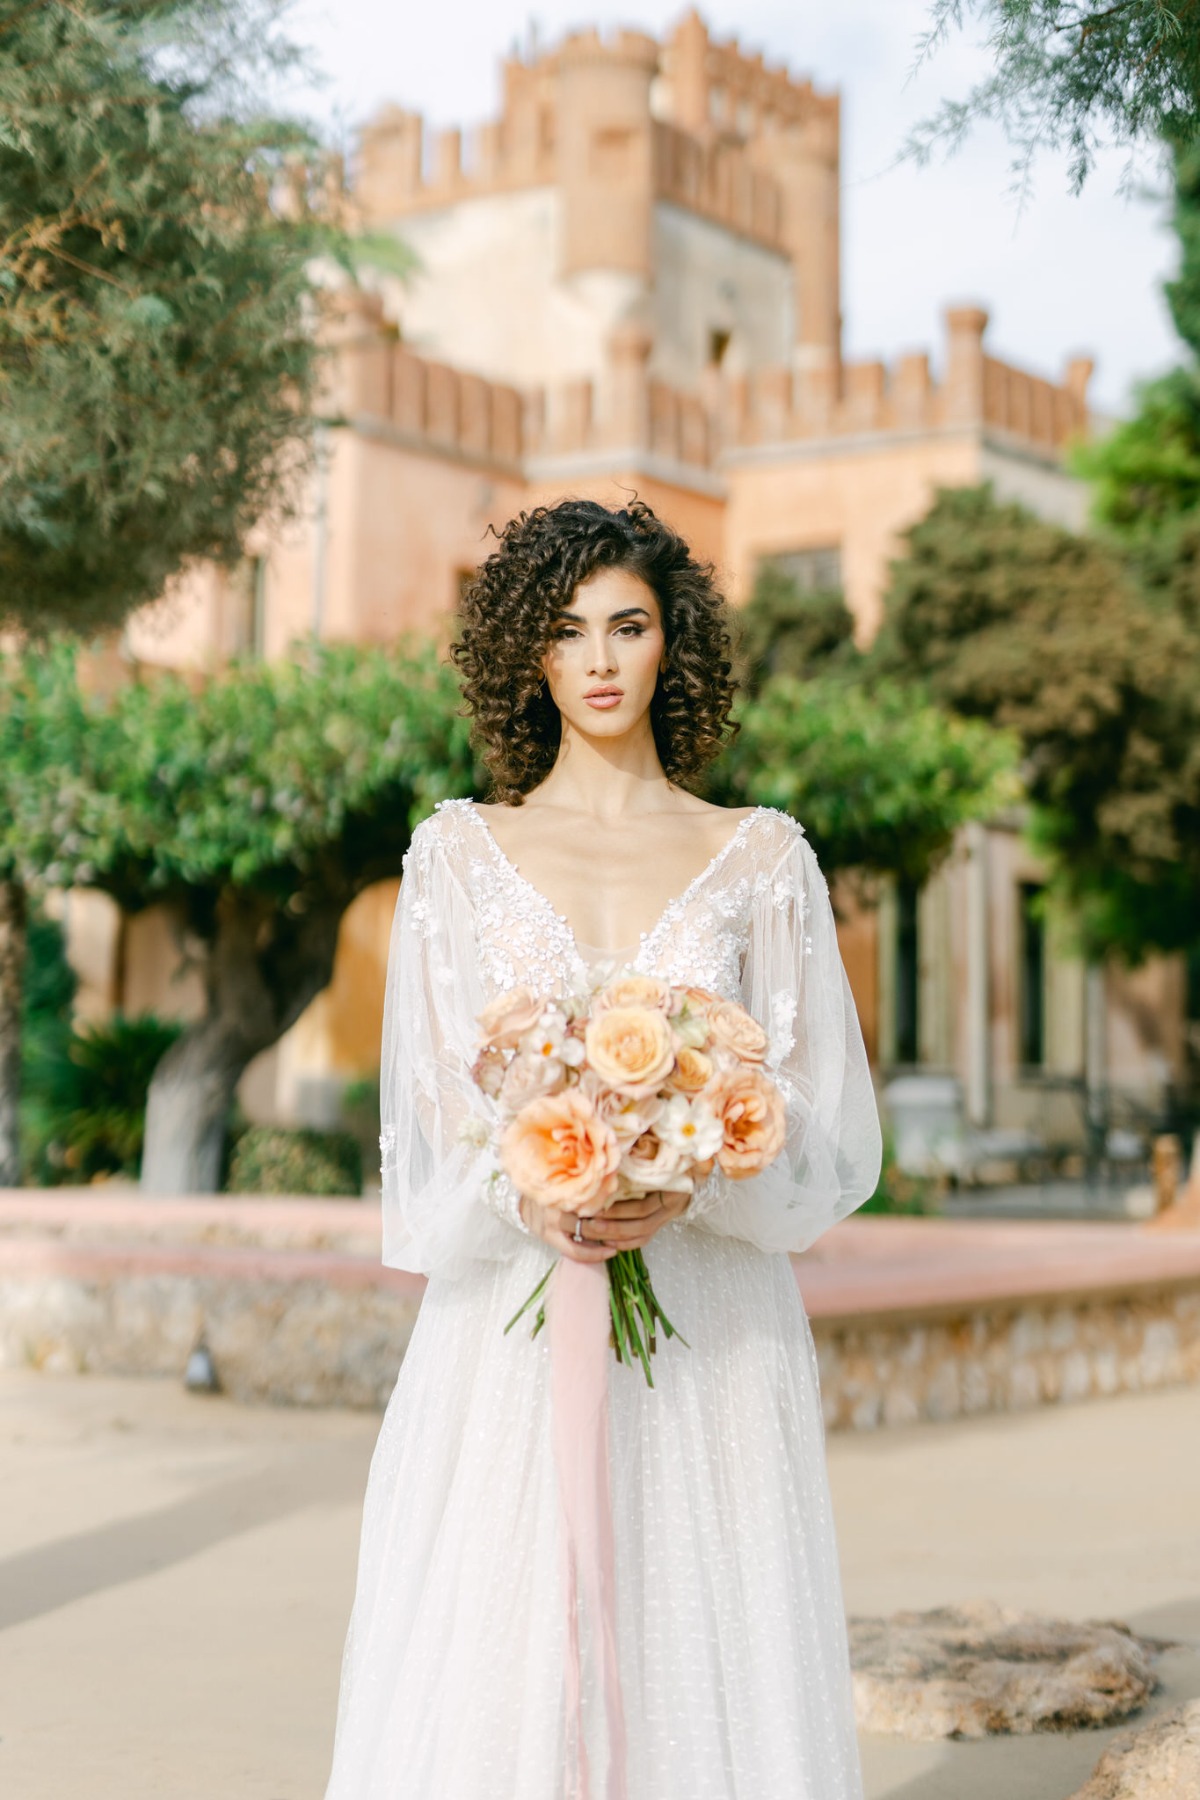 Romantic, billowing floral wedding gown at Greek wedding